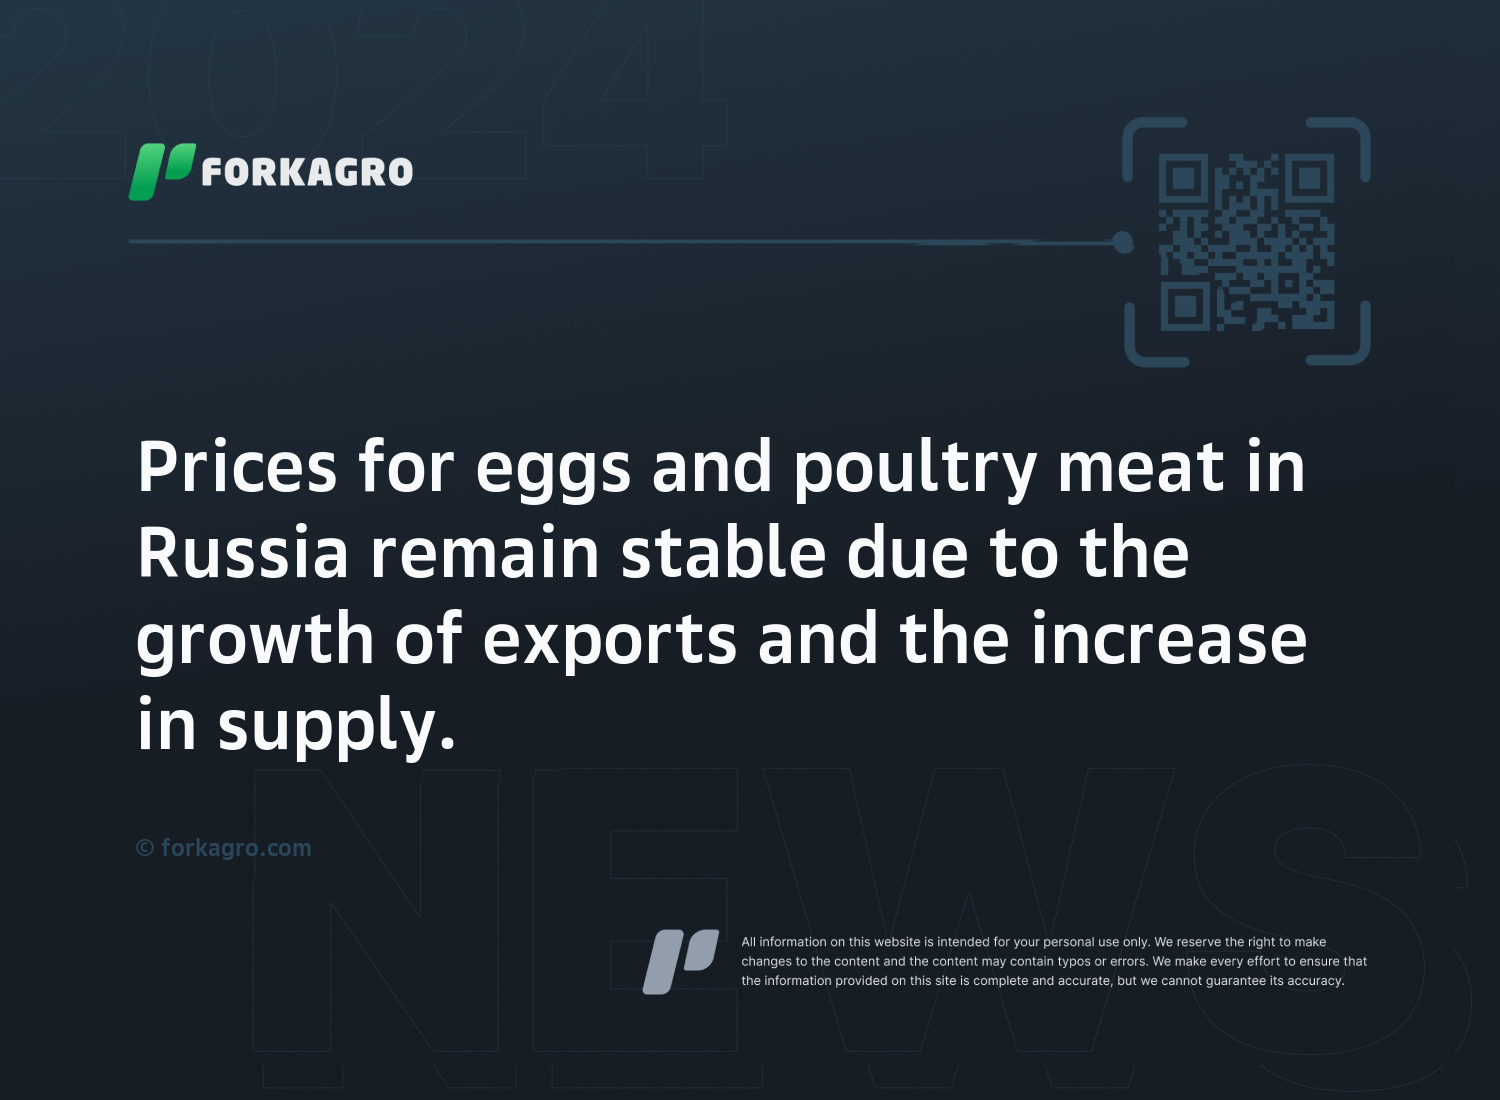 Prices for eggs and poultry meat in Russia remain stable due to the growth of exports and the increase in supply.